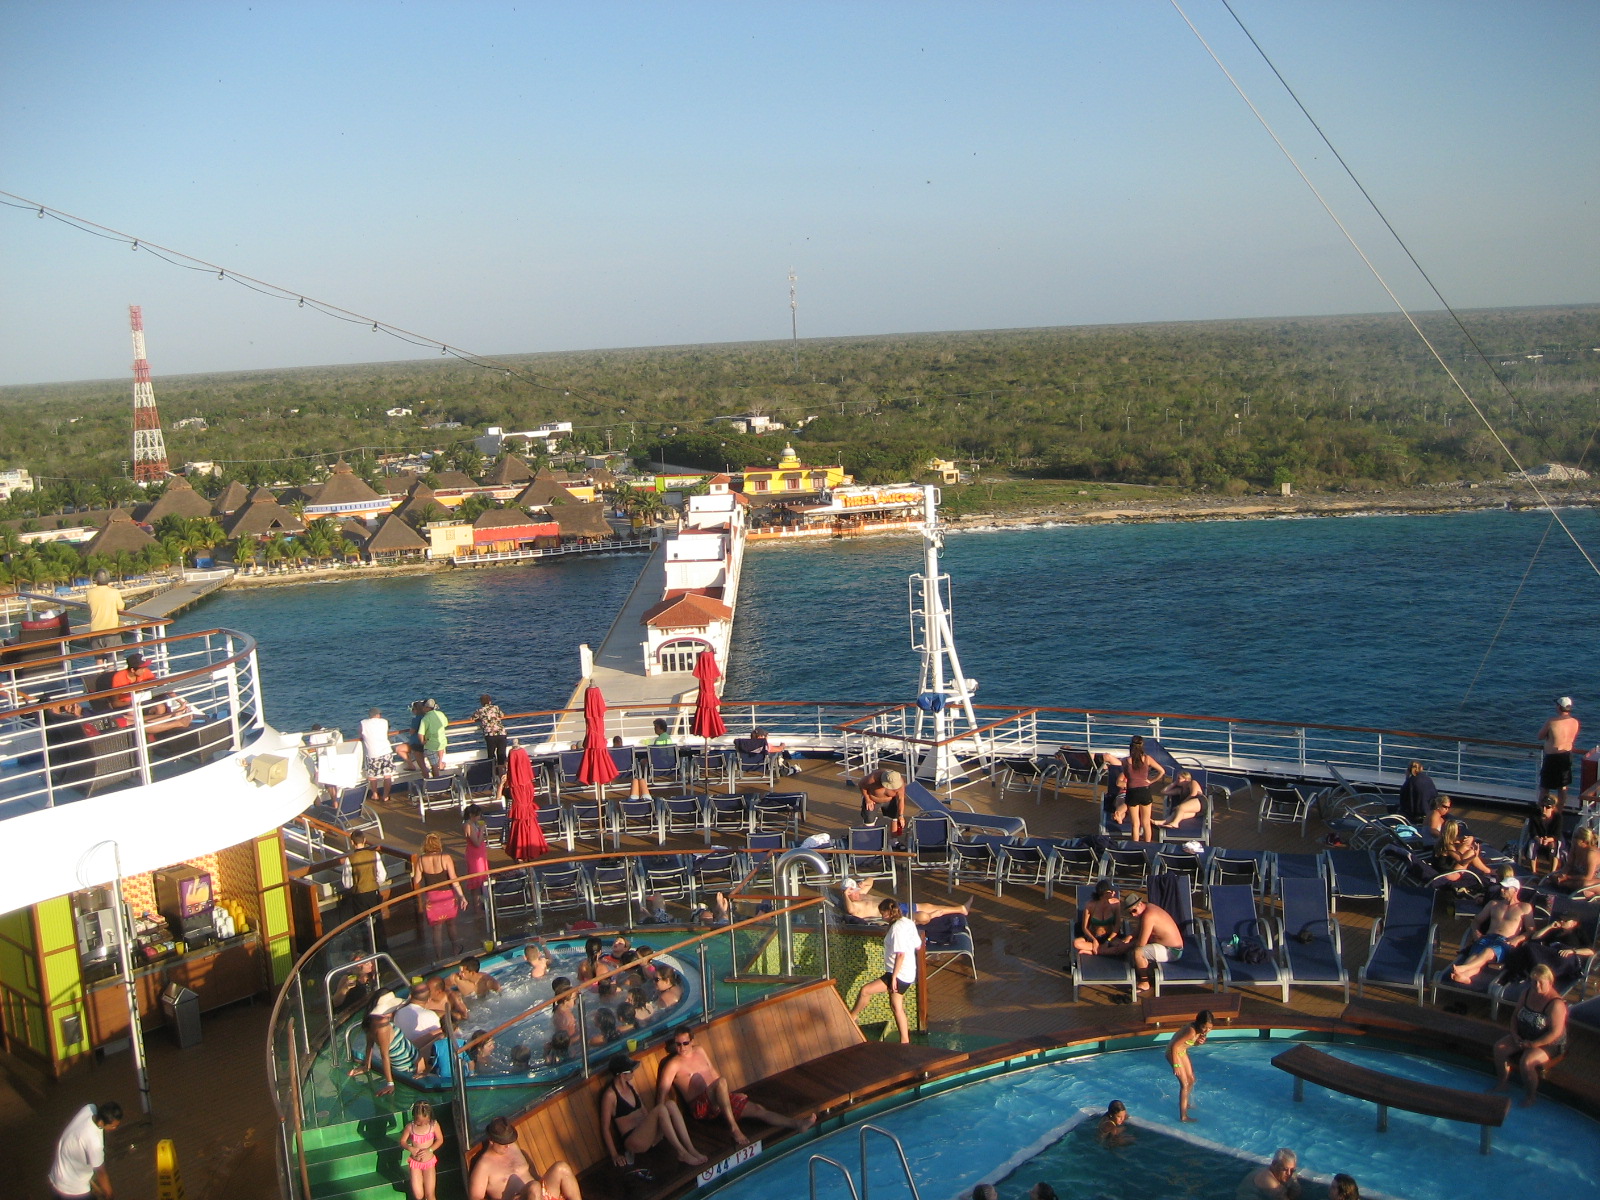 carnival victory march 2013